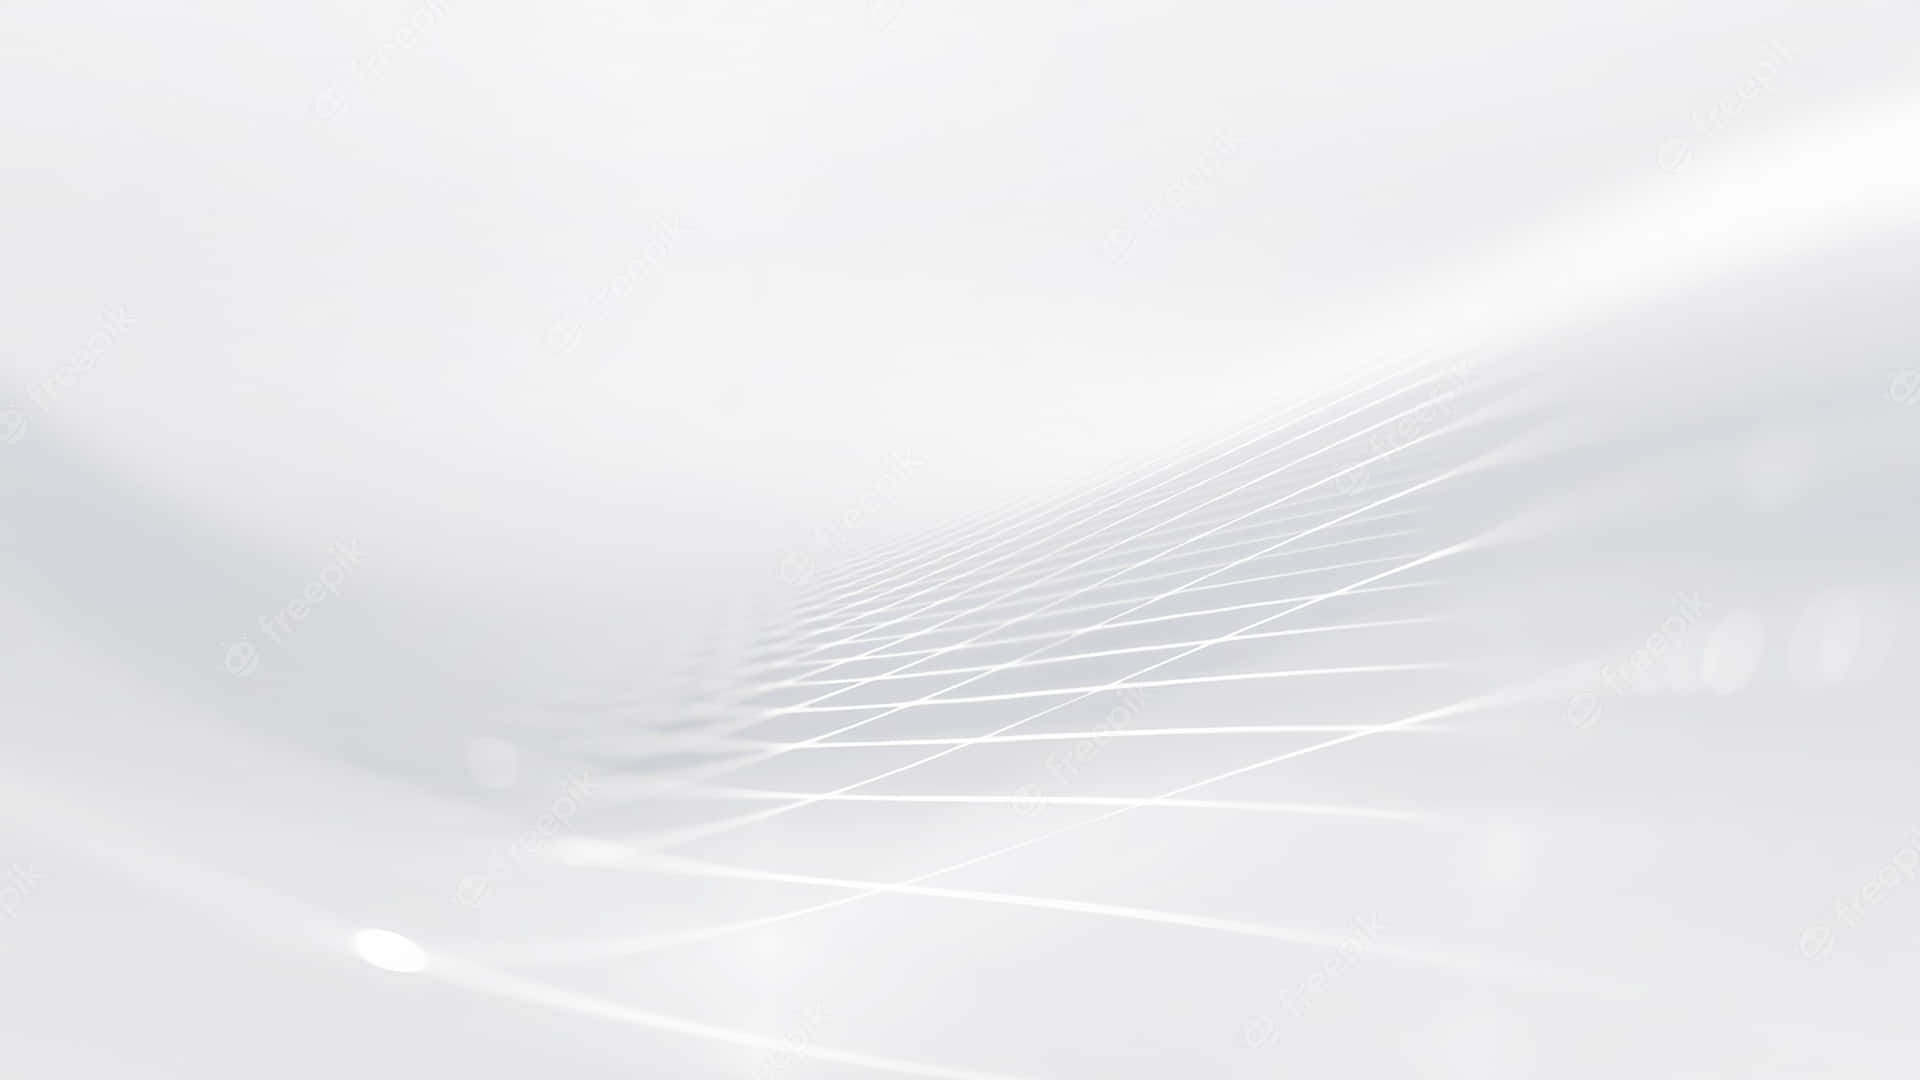 Abstraction of White